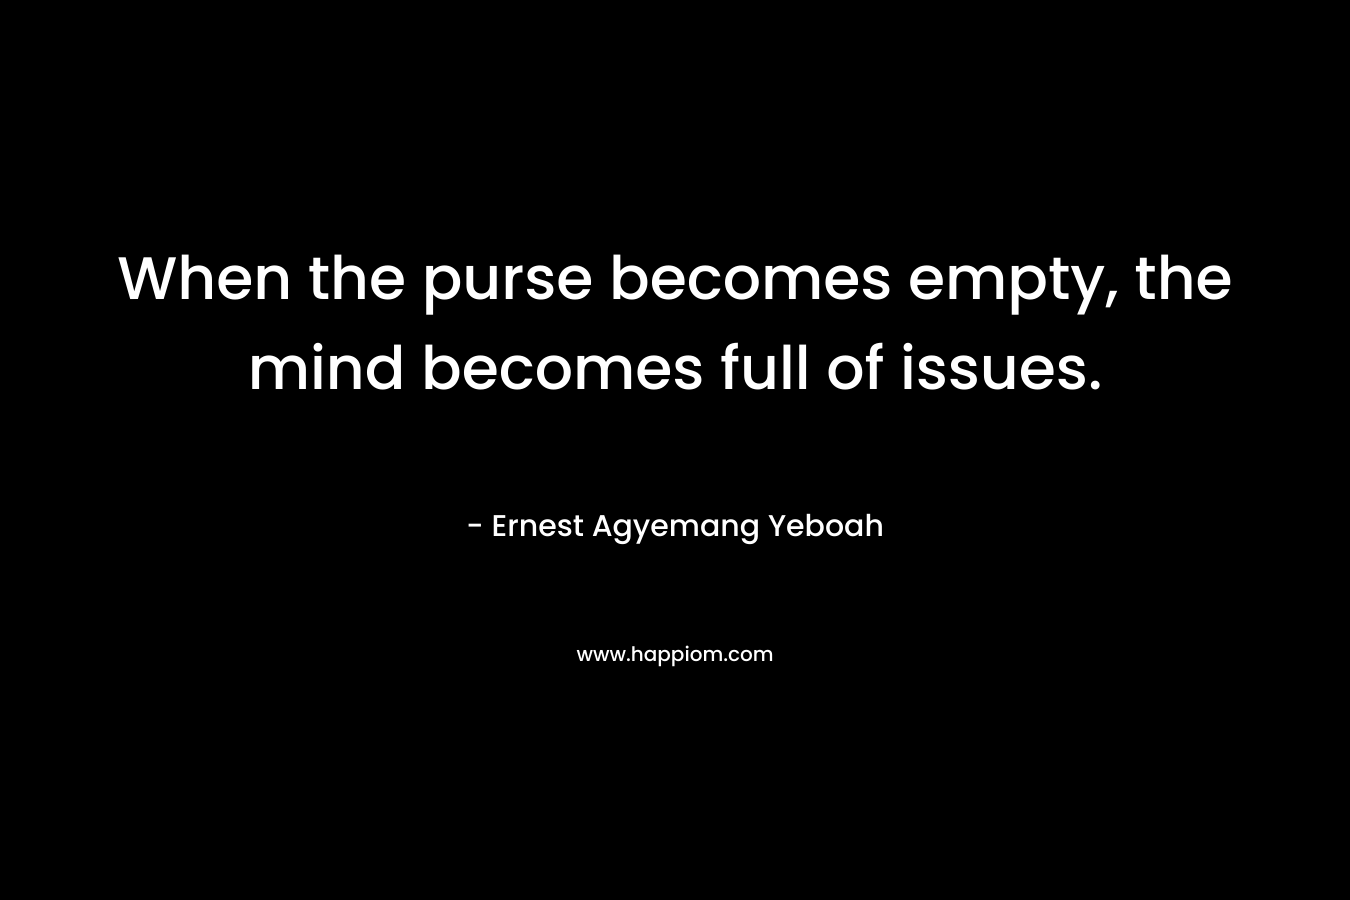 When the purse becomes empty, the mind becomes full of issues. – Ernest Agyemang Yeboah